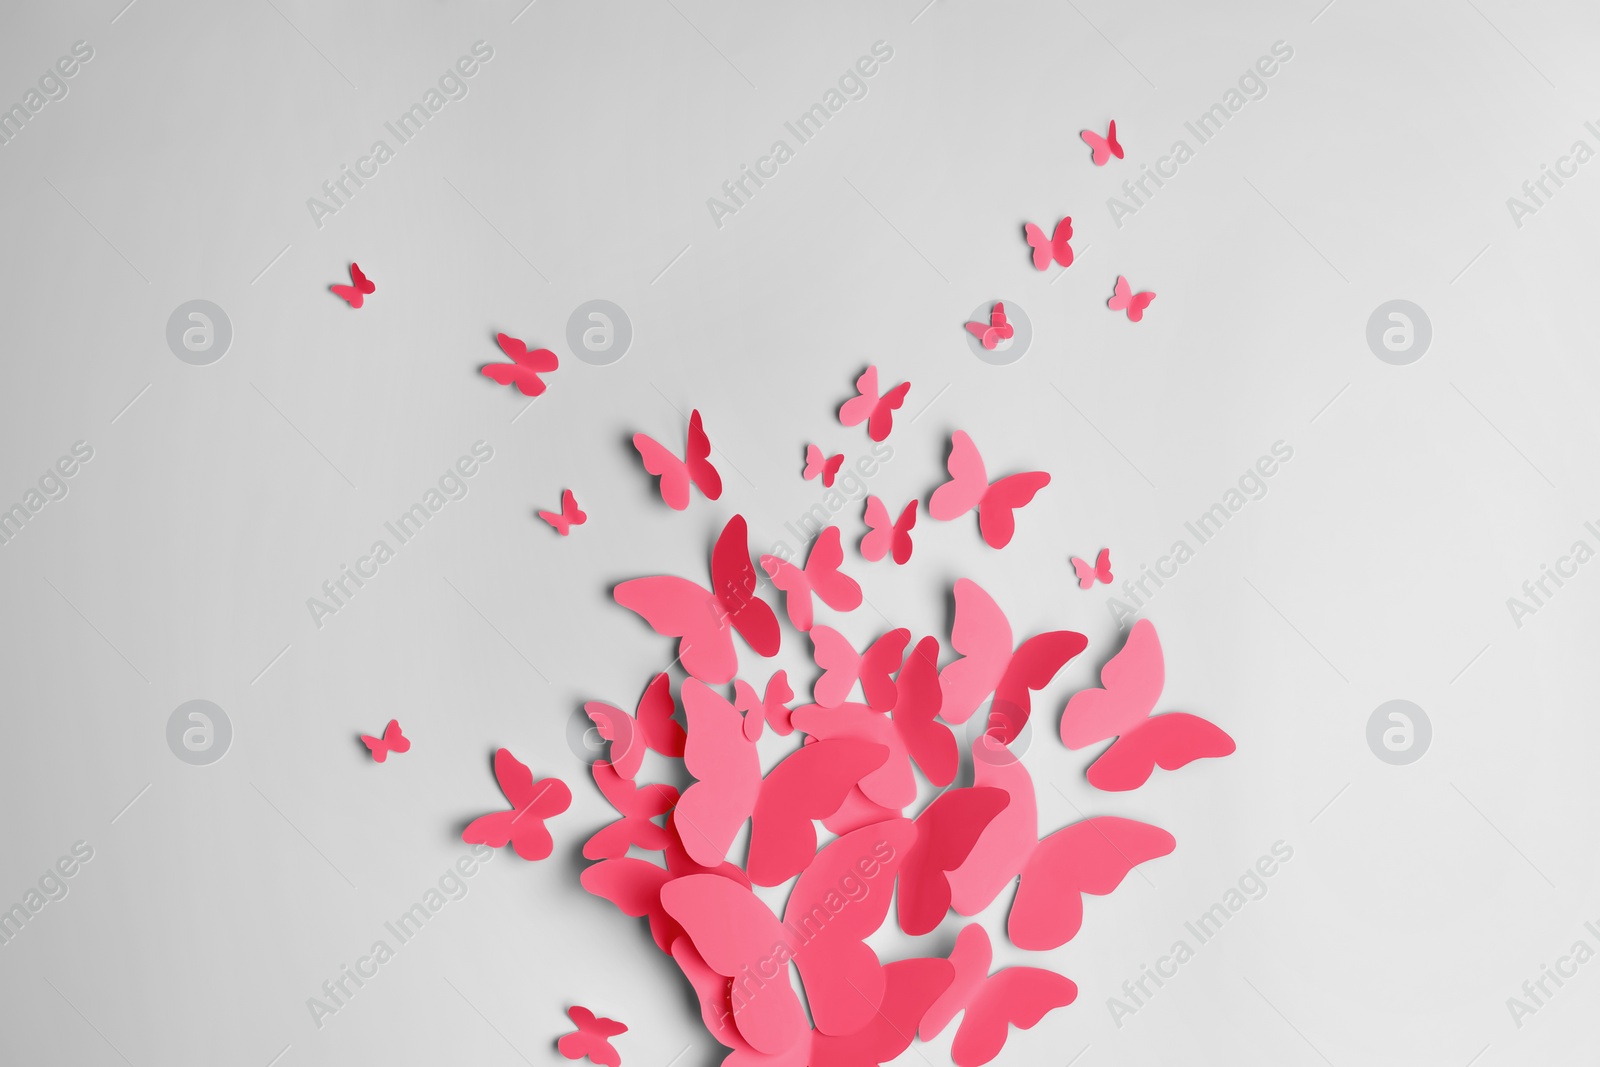 Image of Bright red paper butterflies on white wall